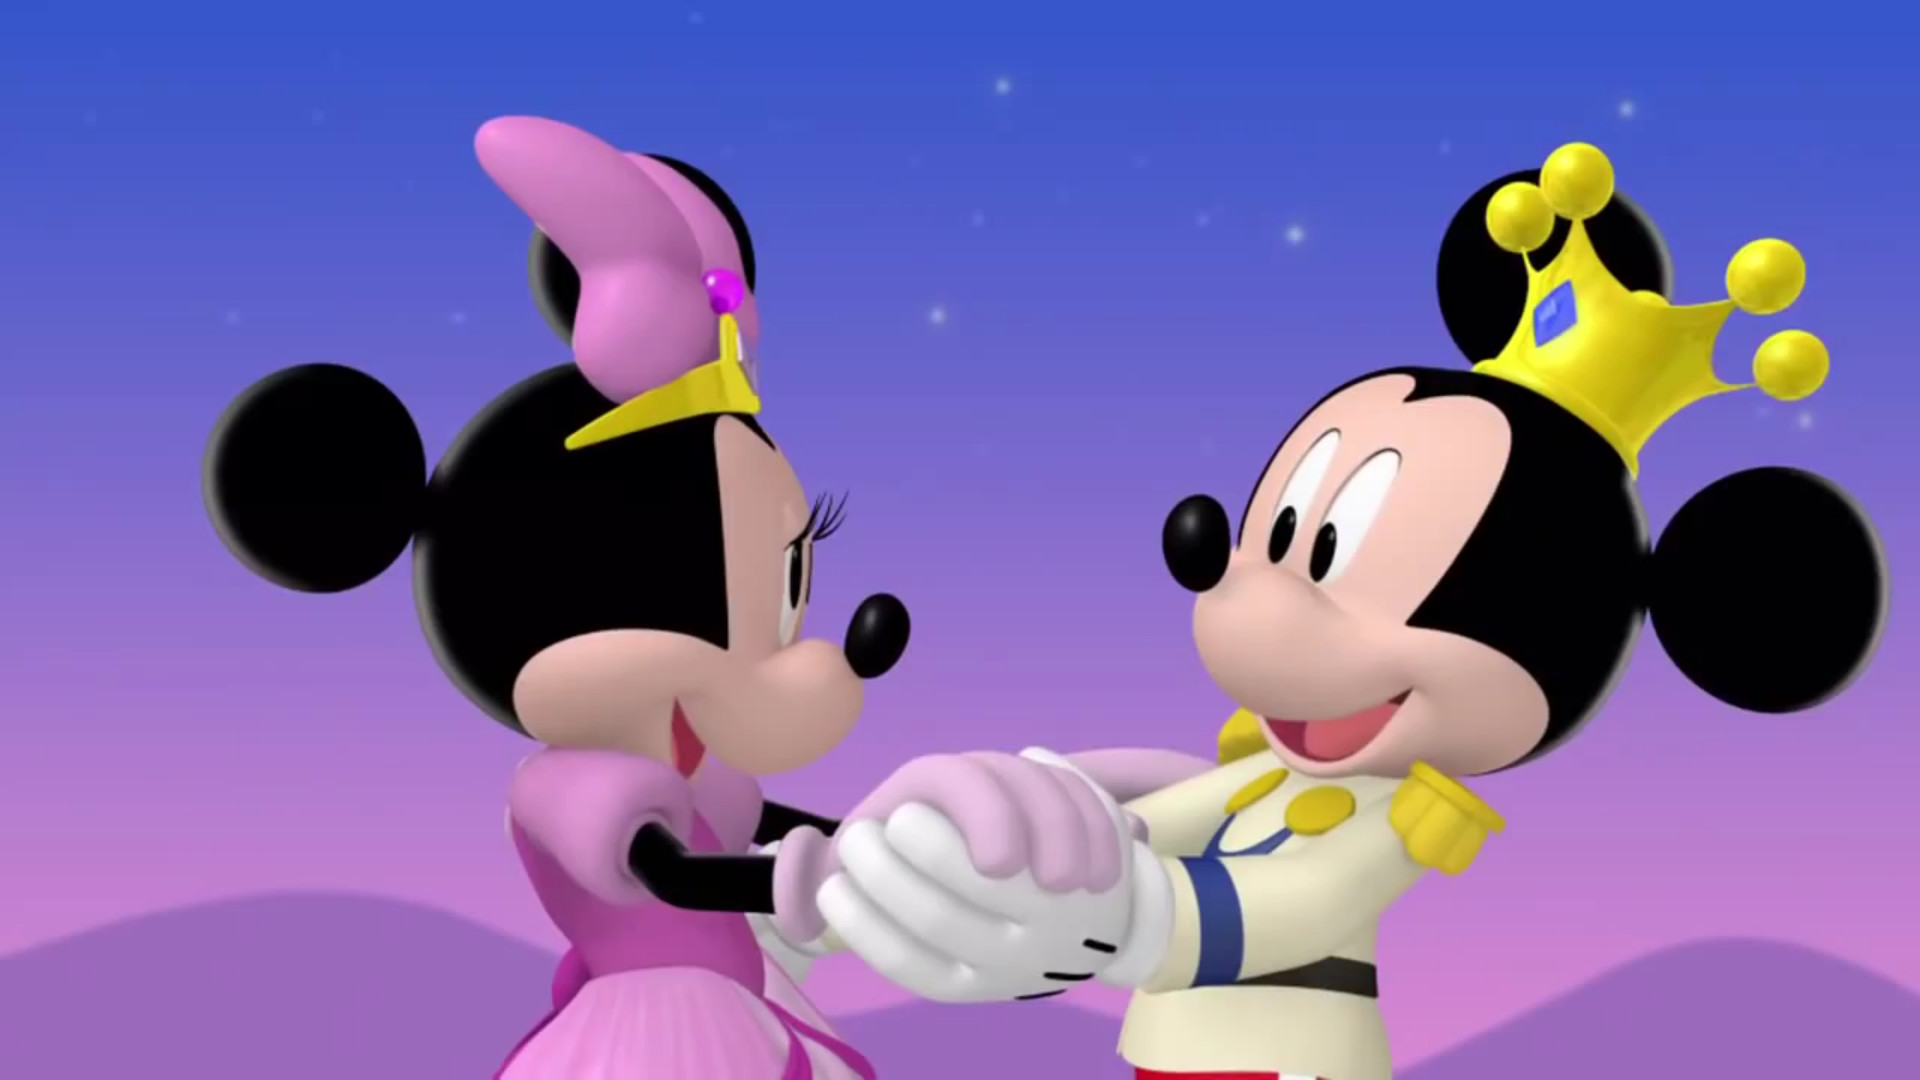 Mickey Mouse and Minnie Mouse Wallpaper  Mickey and Minnie Wallpaper  6351094  Fanpop